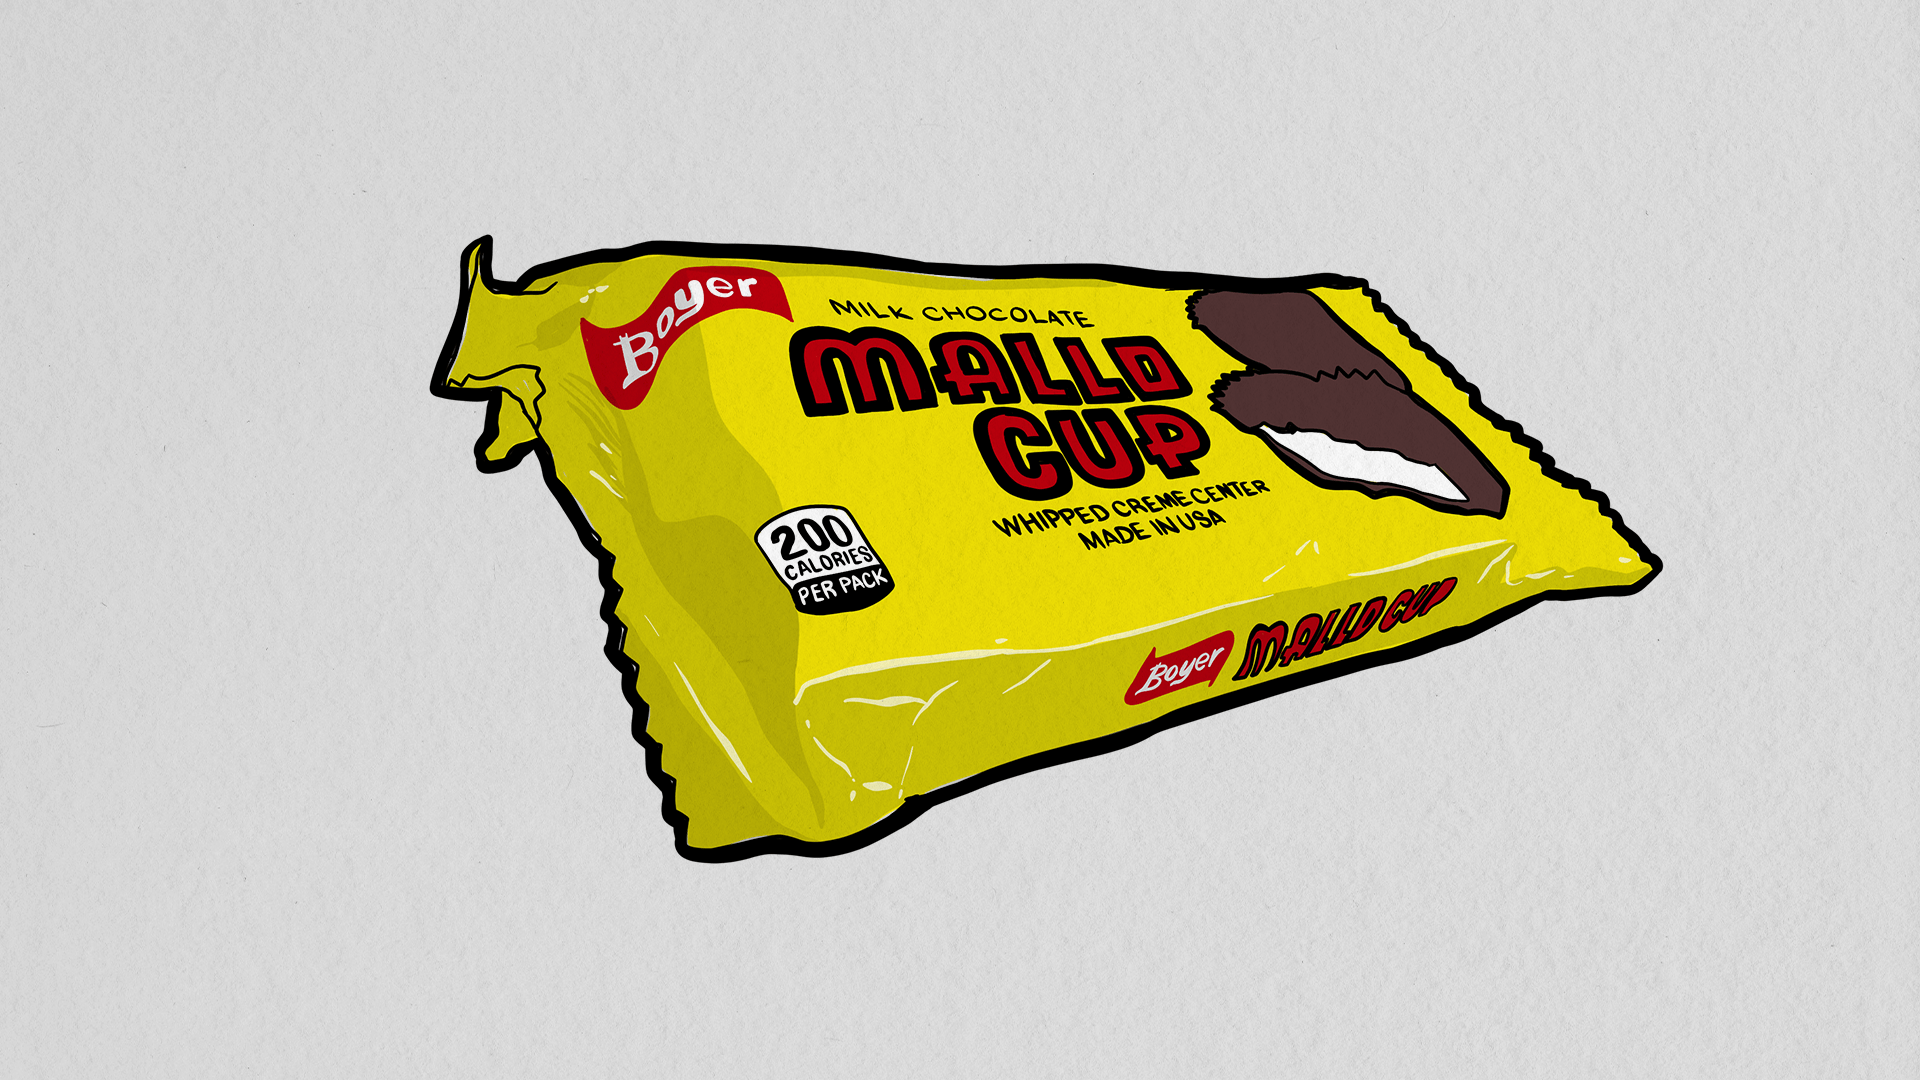 CandyisDandy_Drawings_0002_Mallo-Cup-min.png